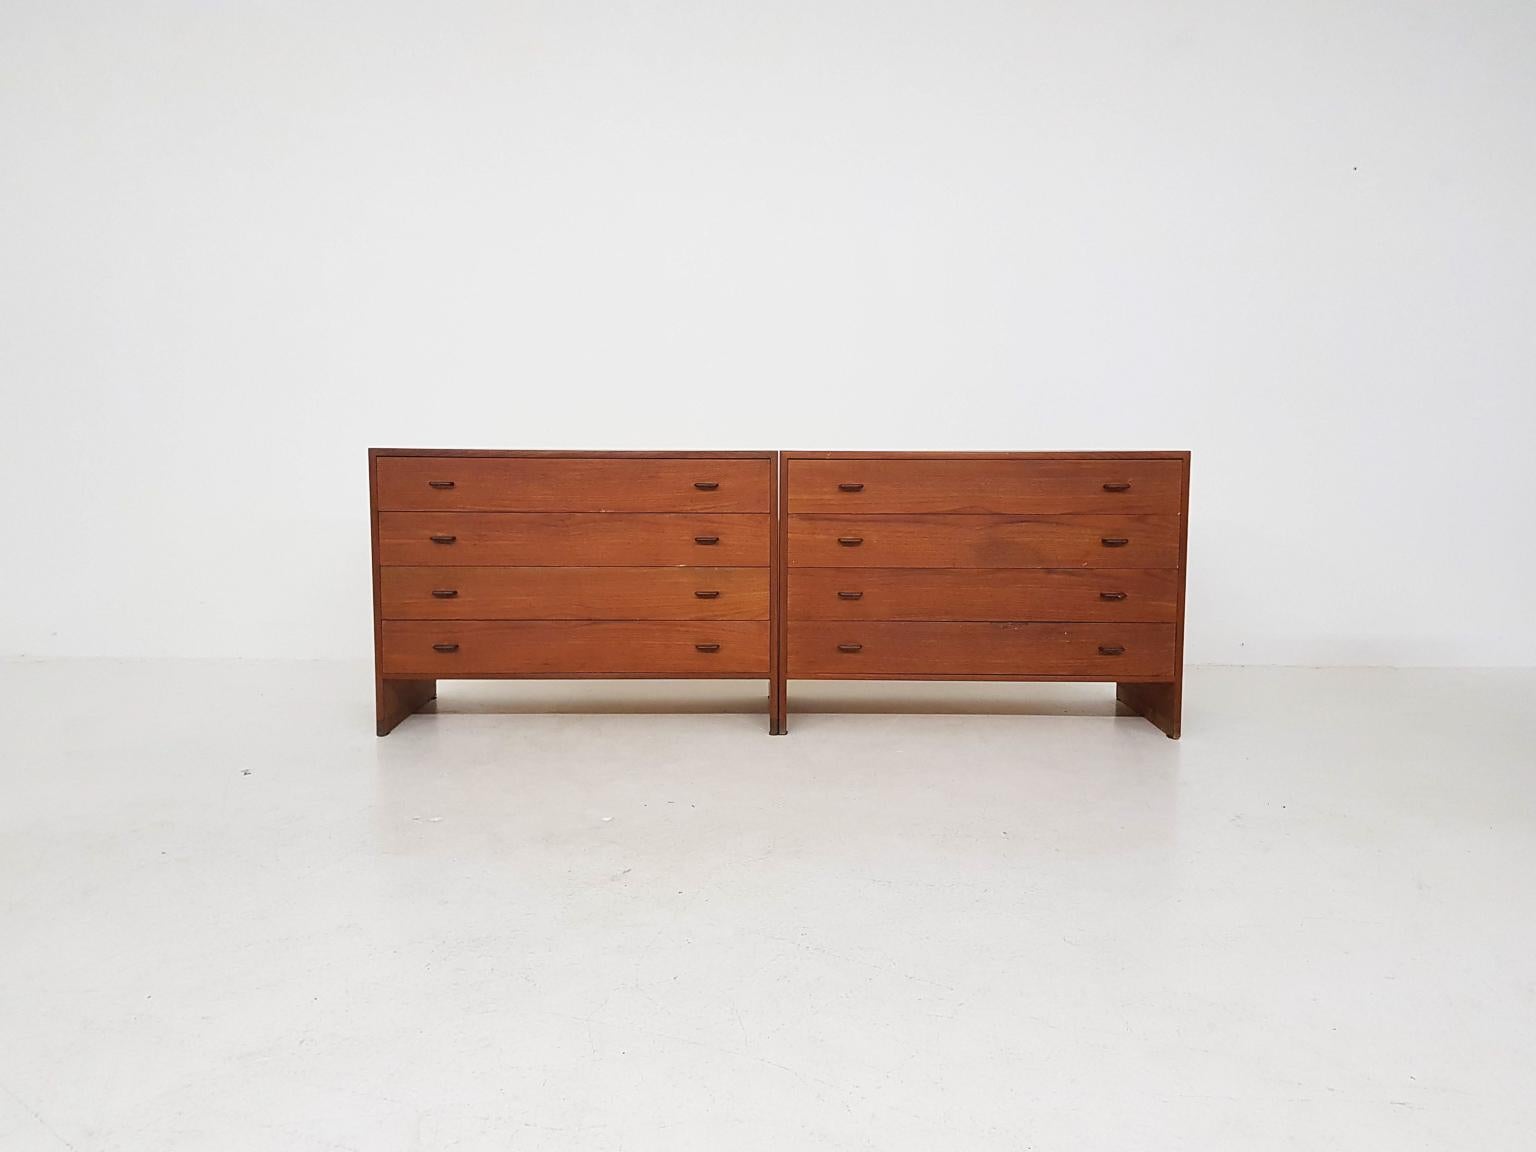 A matching pair of “RY16” chest of drawers or commodes by legendary Danish designer Hans J. Wegner for Ry Möbler. Made in Denmark in the 1950s.

This type of commode was designed by Hans J. Wegner in the 1950s. A couple of versions exists, some